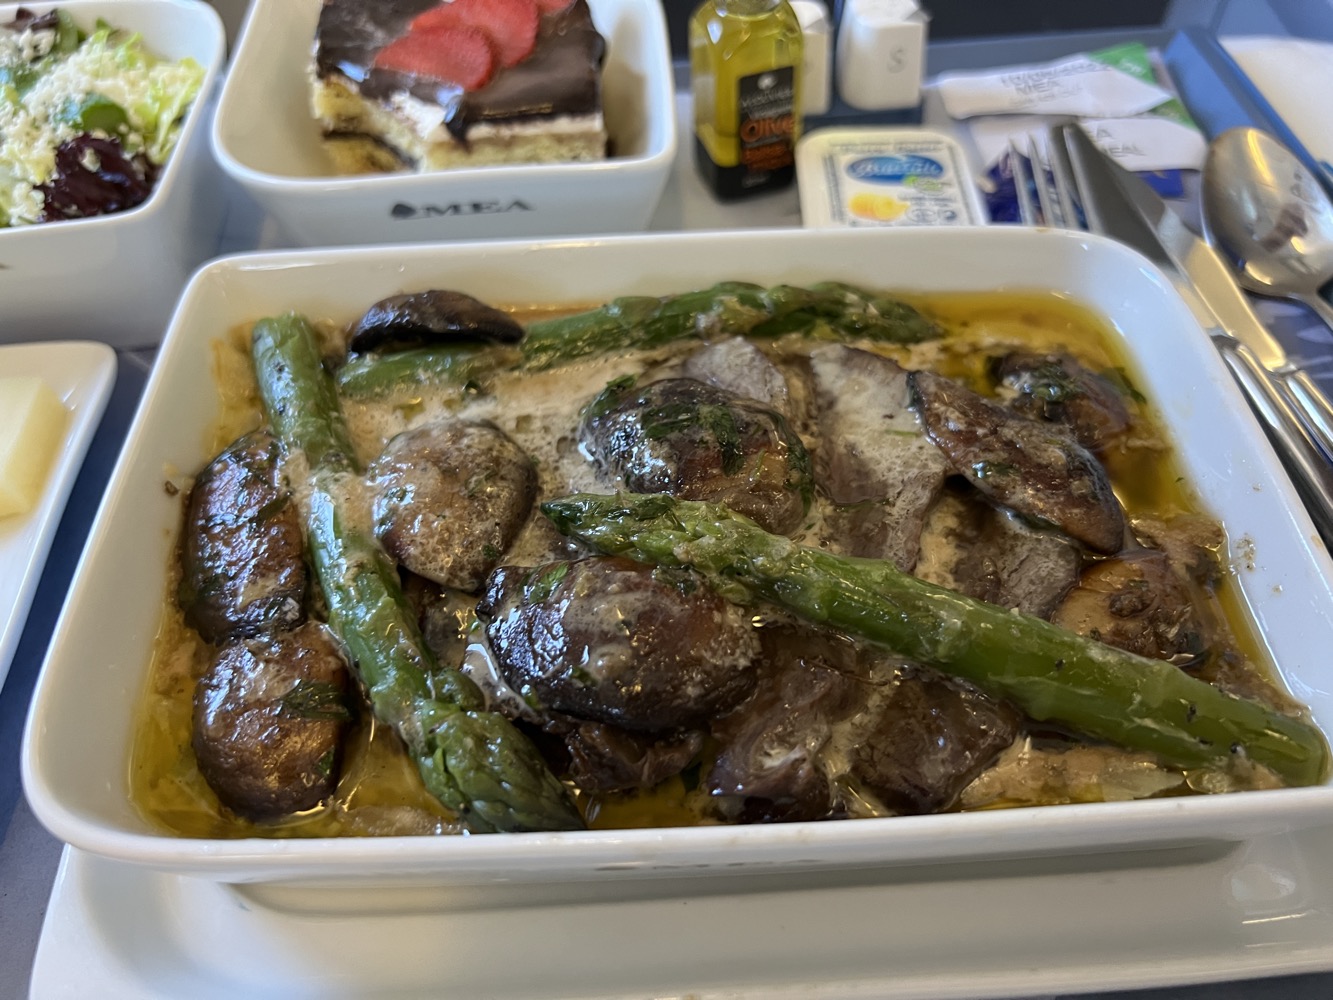 a dish of food with asparagus and mushrooms